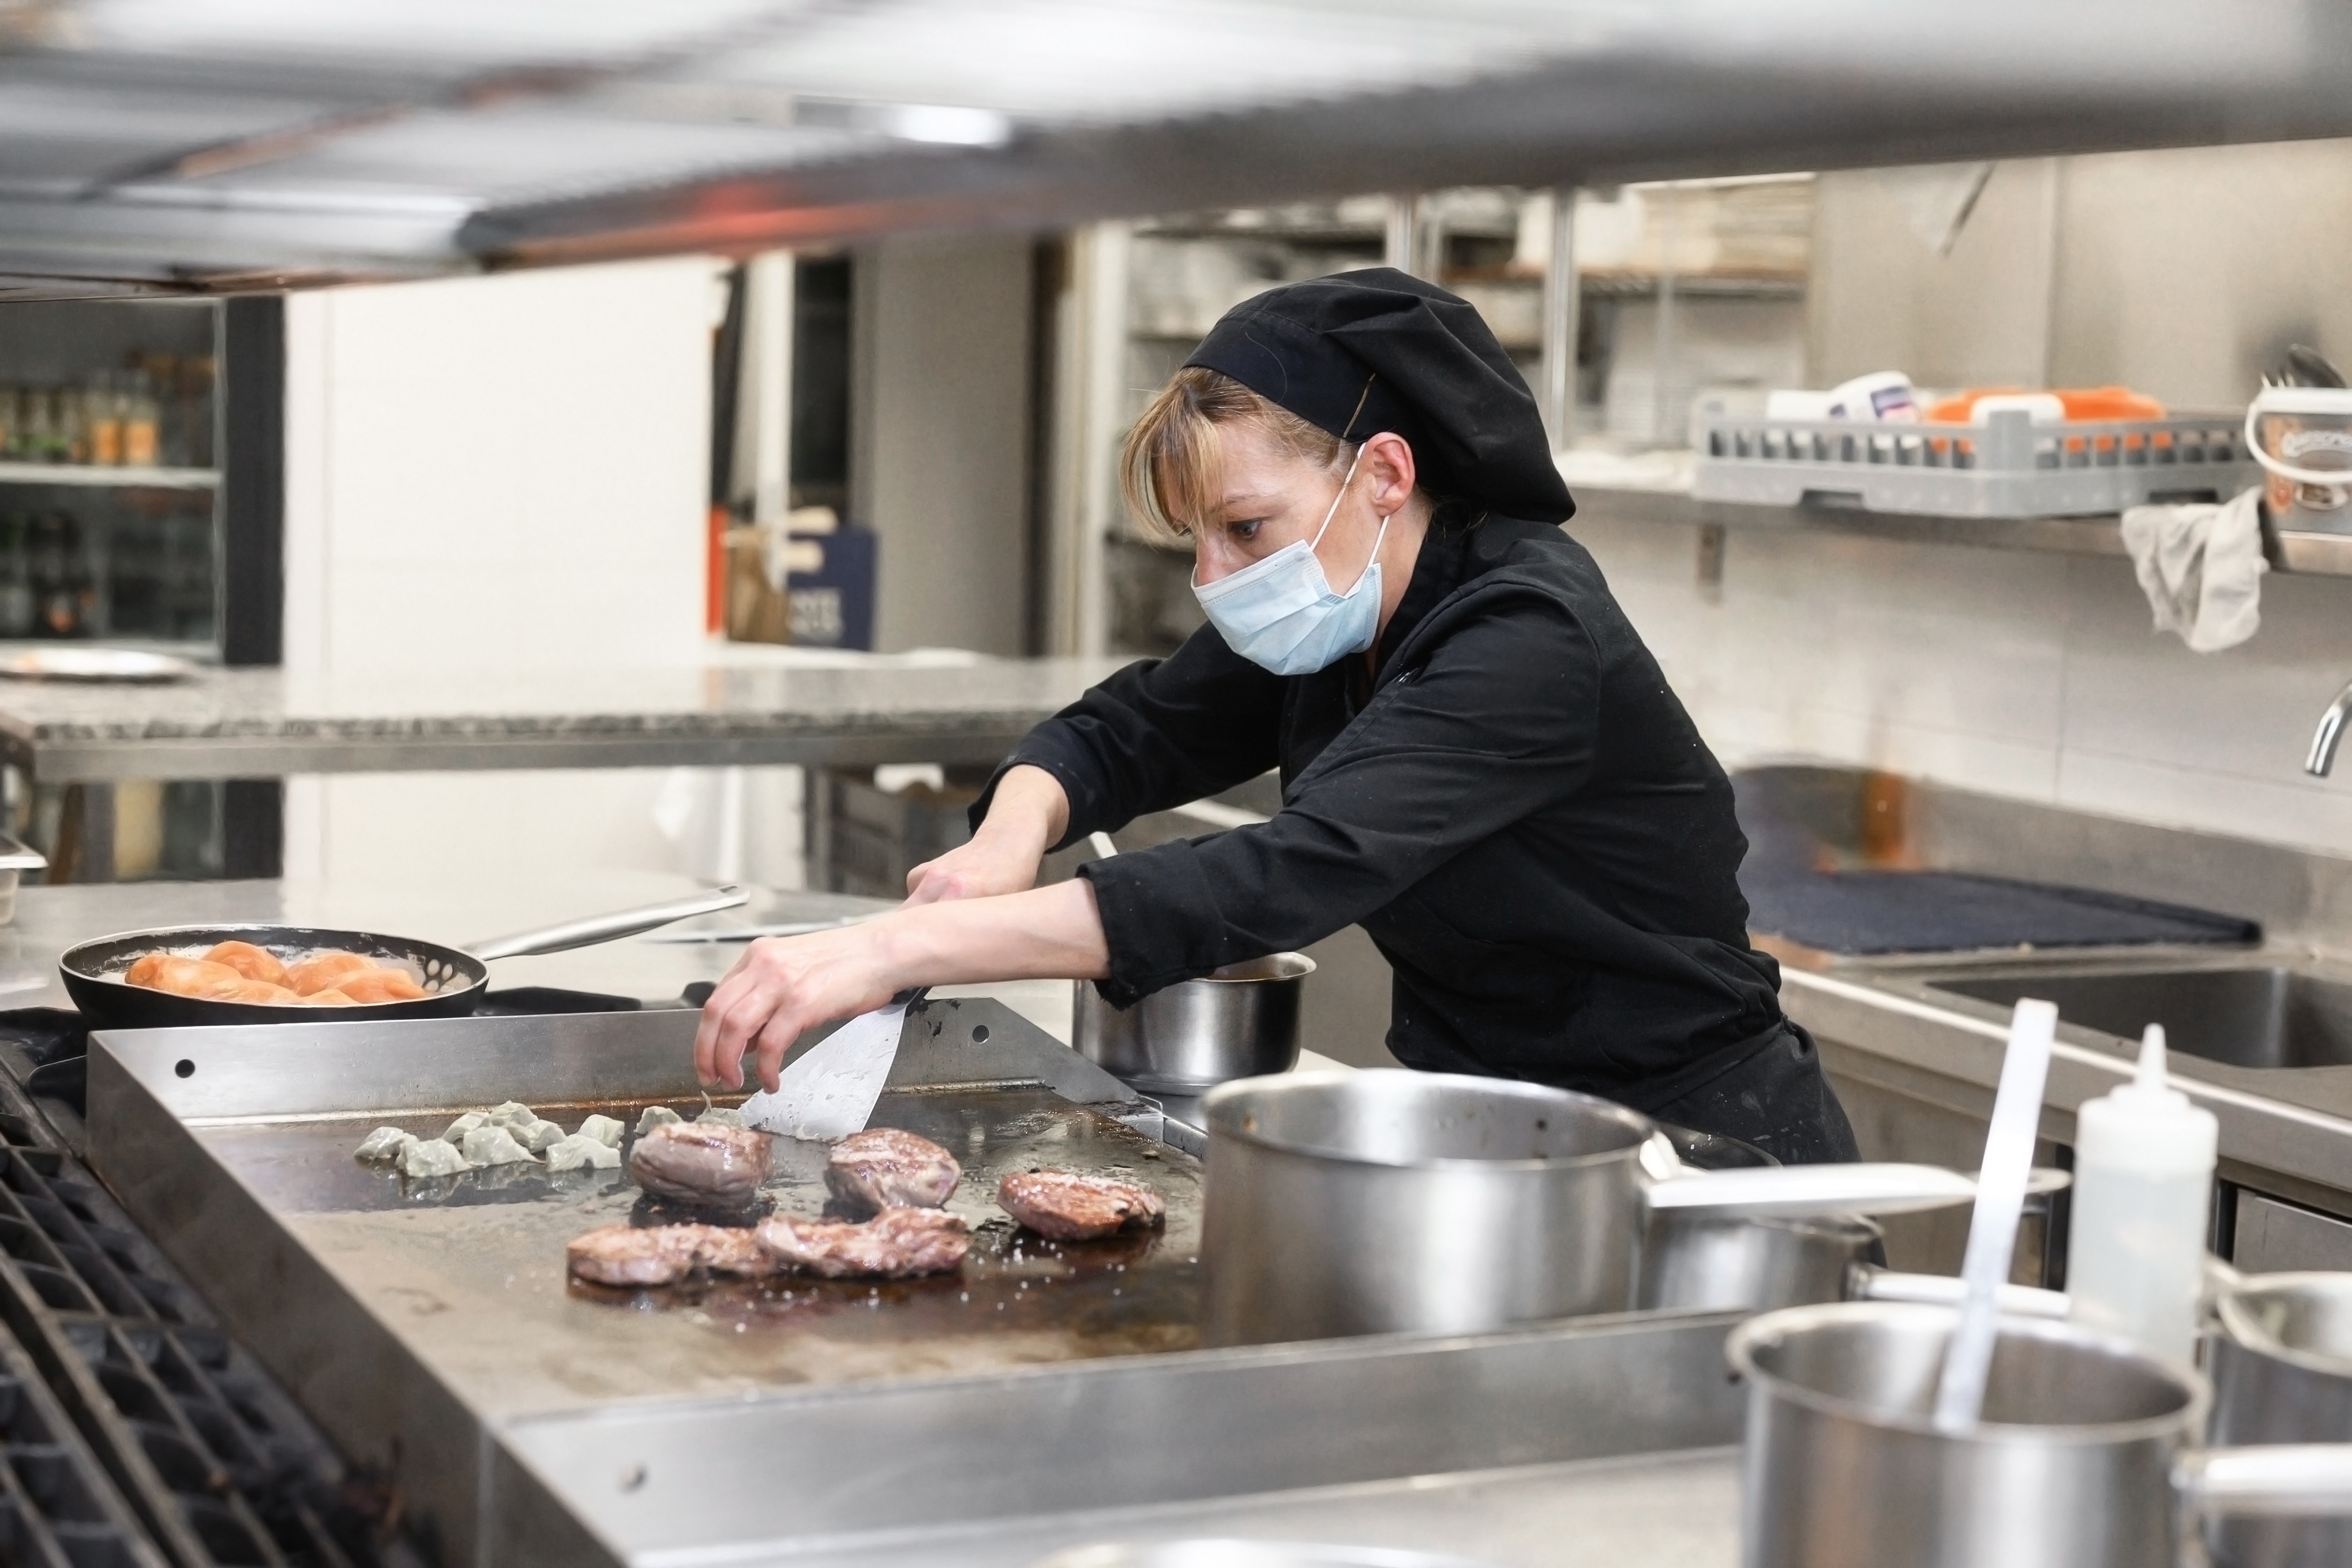 A female chef in a black chef’s coat and a surgical mask looks tense as she flips a steak on a griddle in a restaurant kitchen.